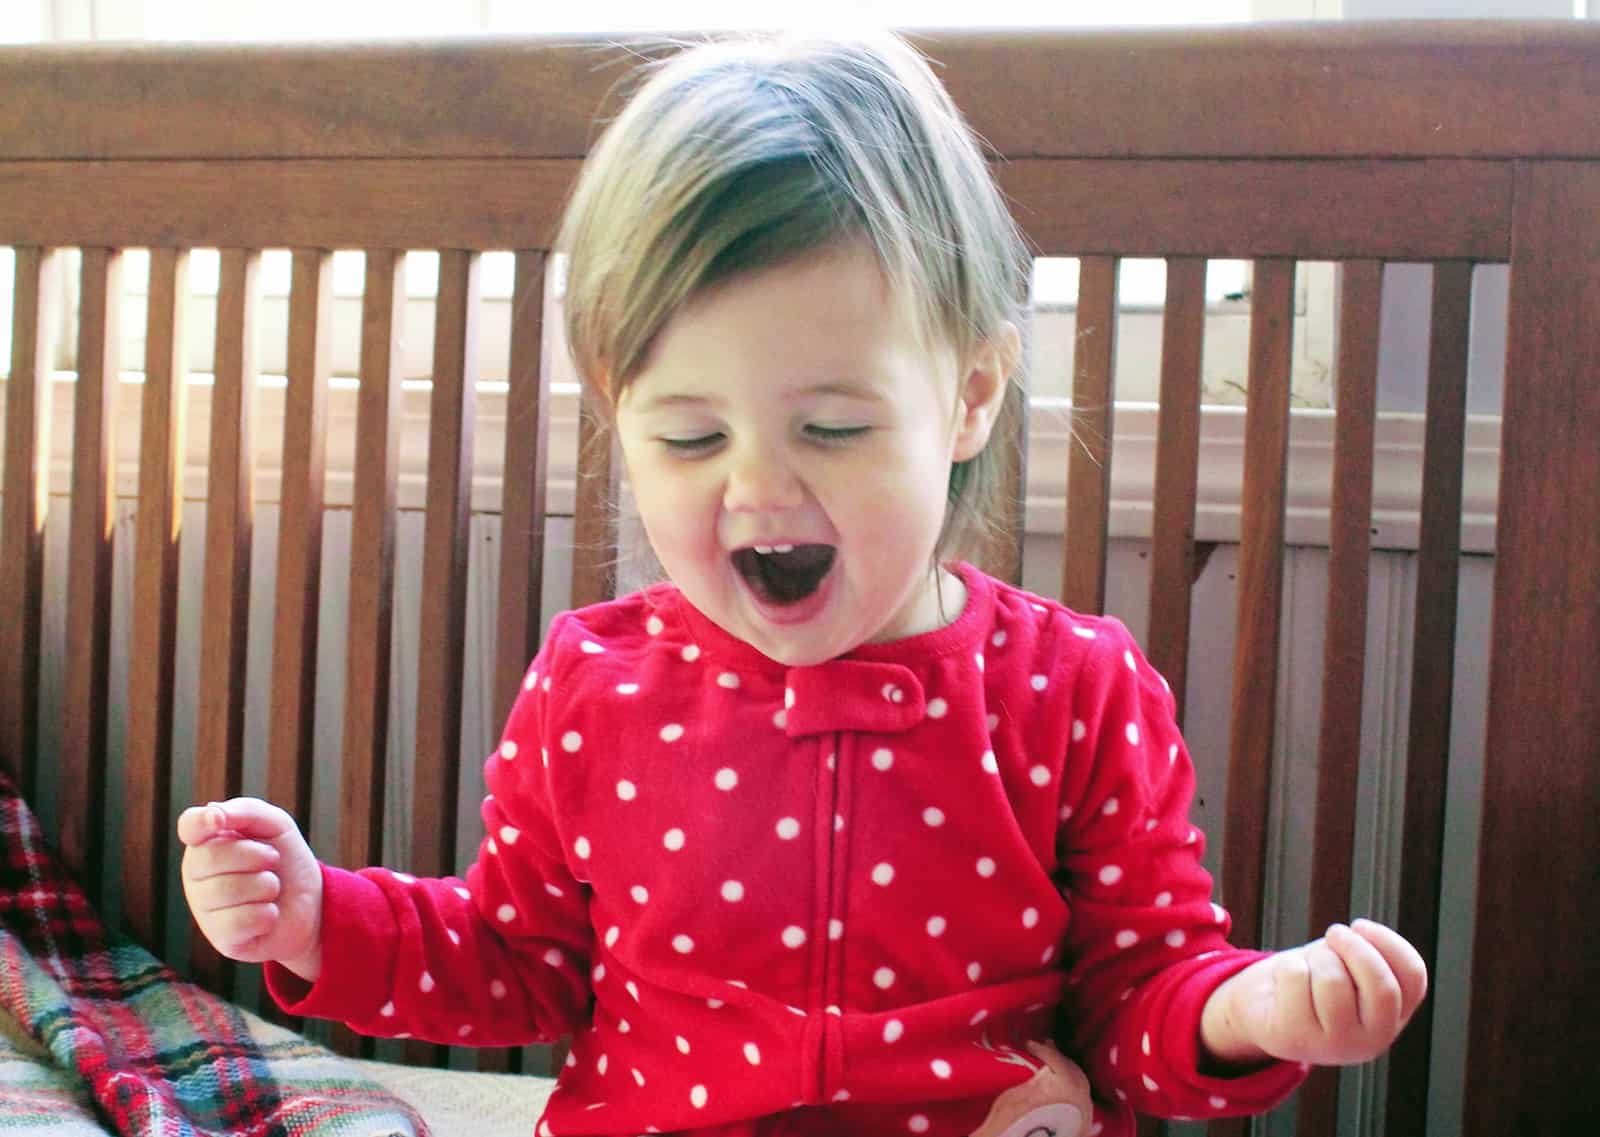 Excited toddler girl during the holiday season.